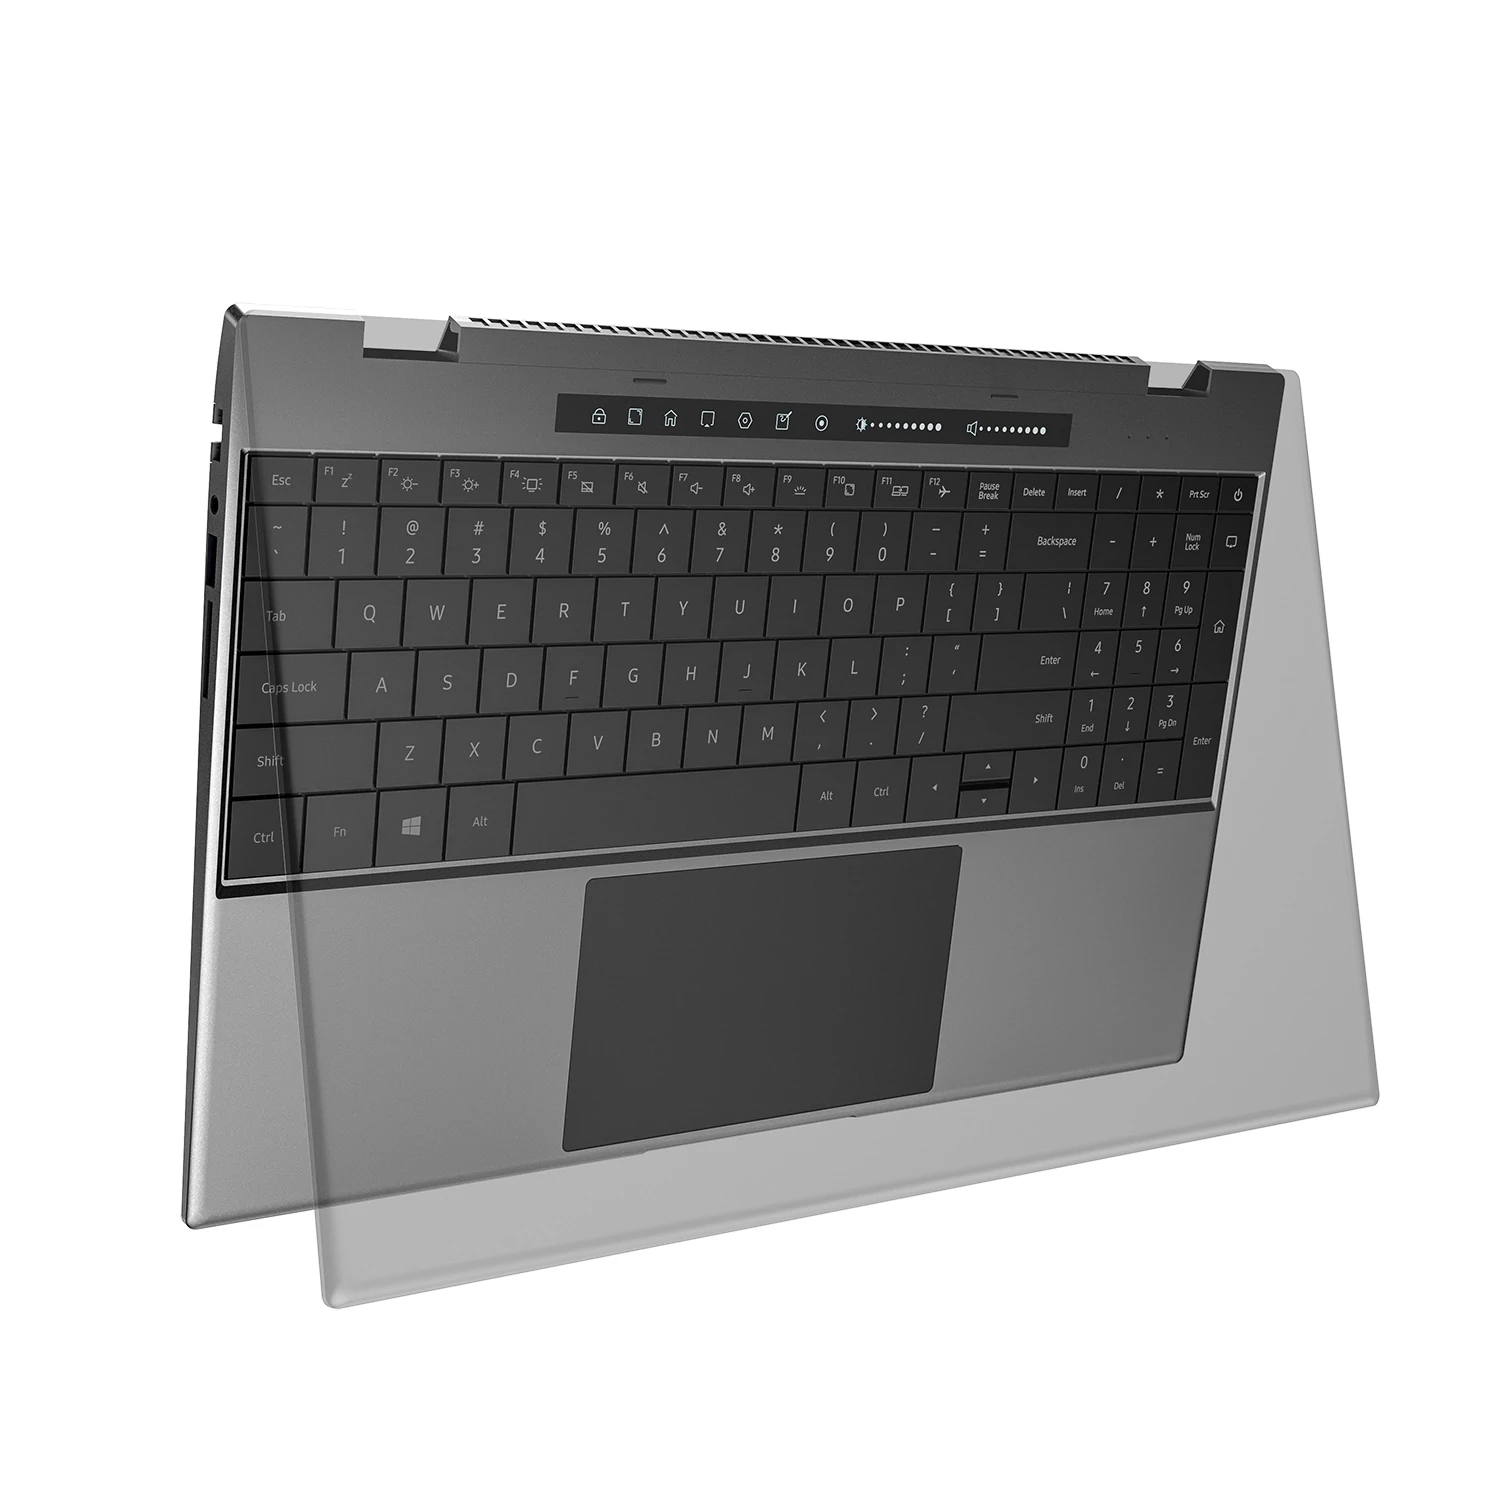 Find 1TB SSD DERE TBOOK T11 Laptop 15 6 Inch Intel i7 1165G7 IntelÂ IrisÂ Xe Graphics 16GB RAM 1TB SSD 1080P Screen Backlit Keyboard 45 6Wh Battery Win10 PRO Notebook for Sale on Gipsybee.com